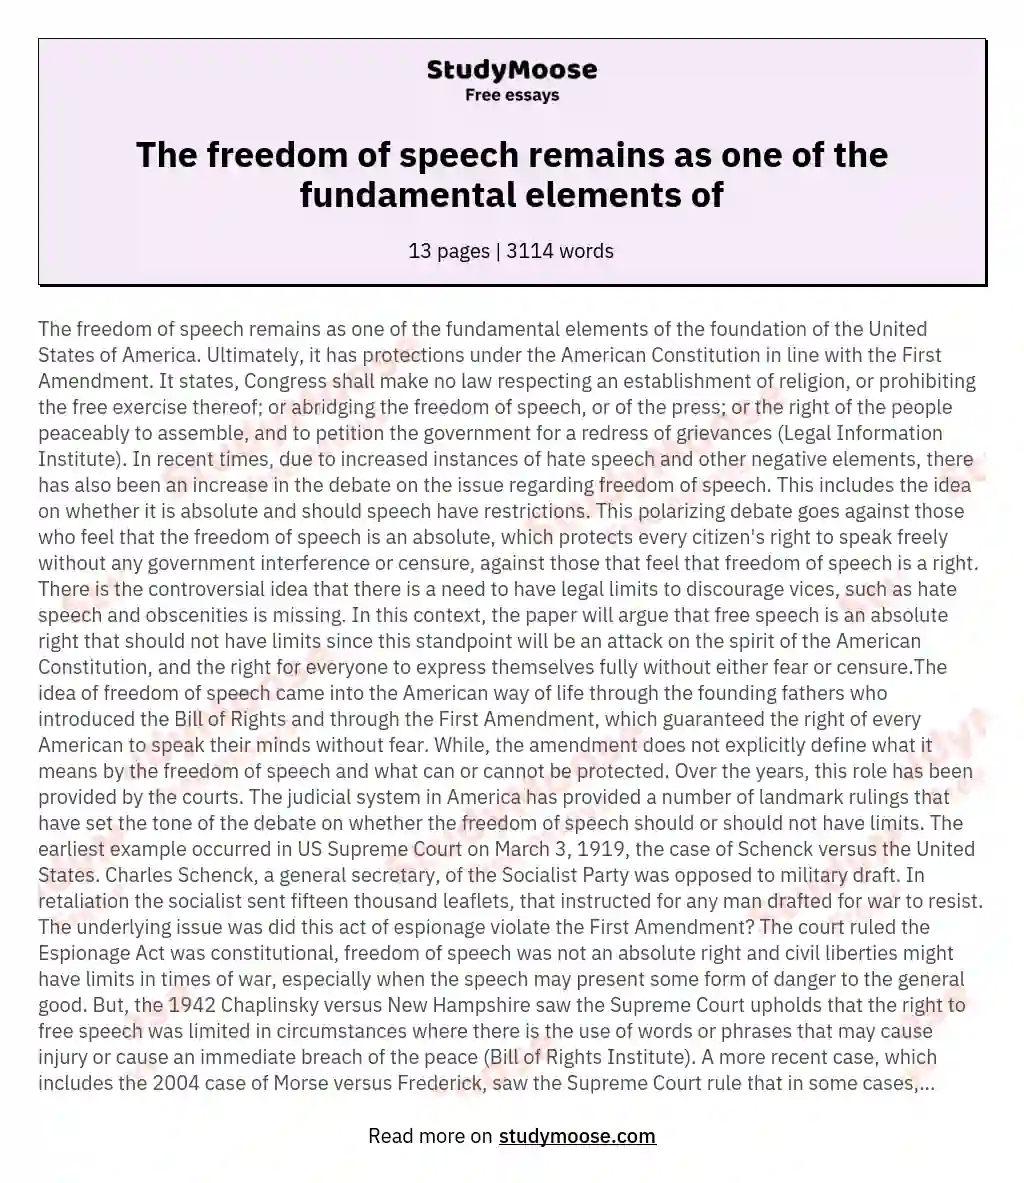 The freedom of speech remains as one of the fundamental elements of